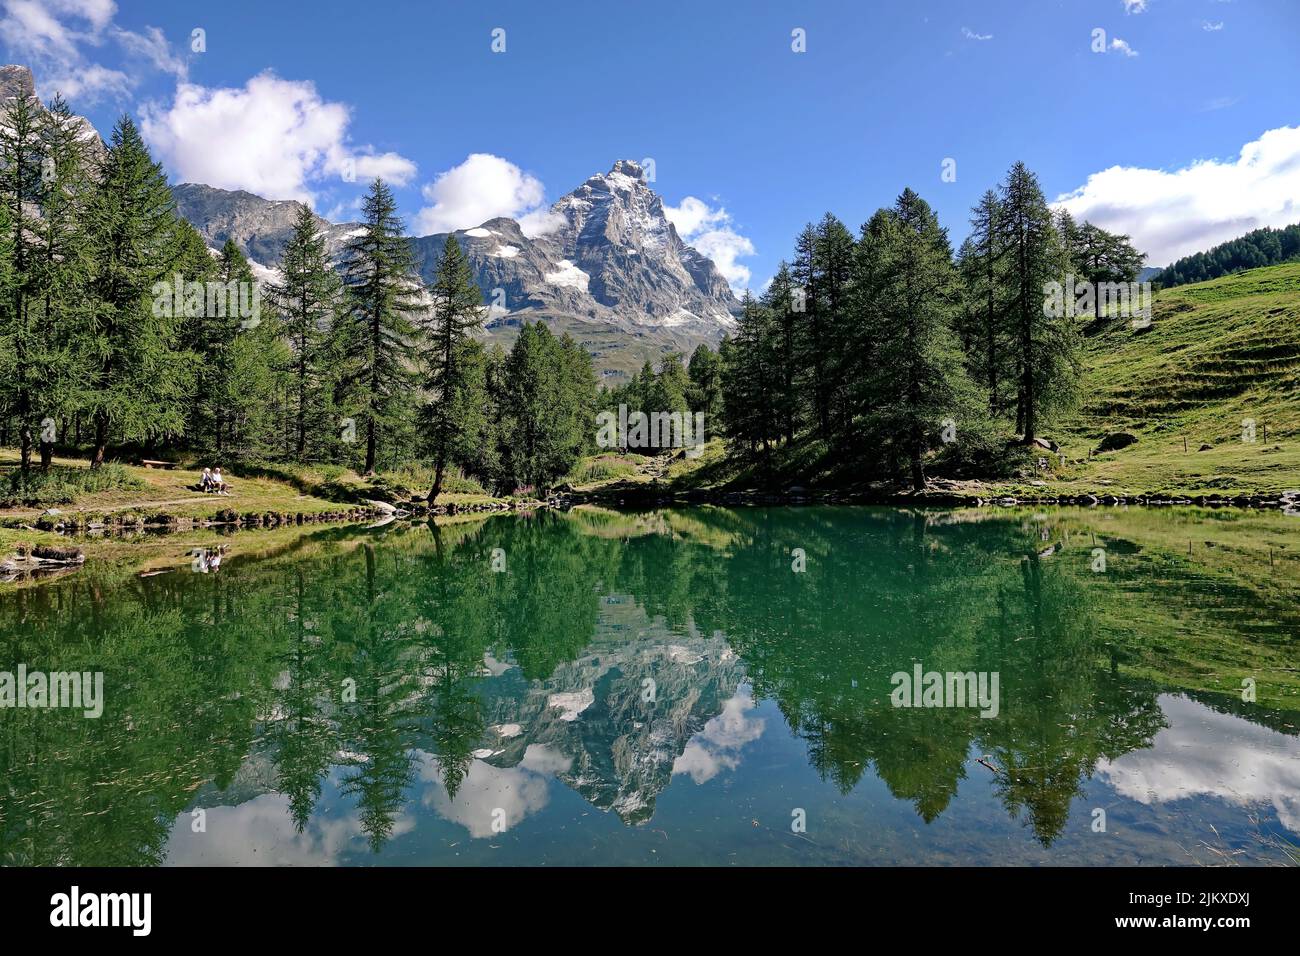 Summer alpine landscape with the Matterhorn (Cervino) reflected on the Blue Lake (Lago Blu) near Breuil-Cervinia. Aosta Valley, Italy - August 2022 Stock Photo